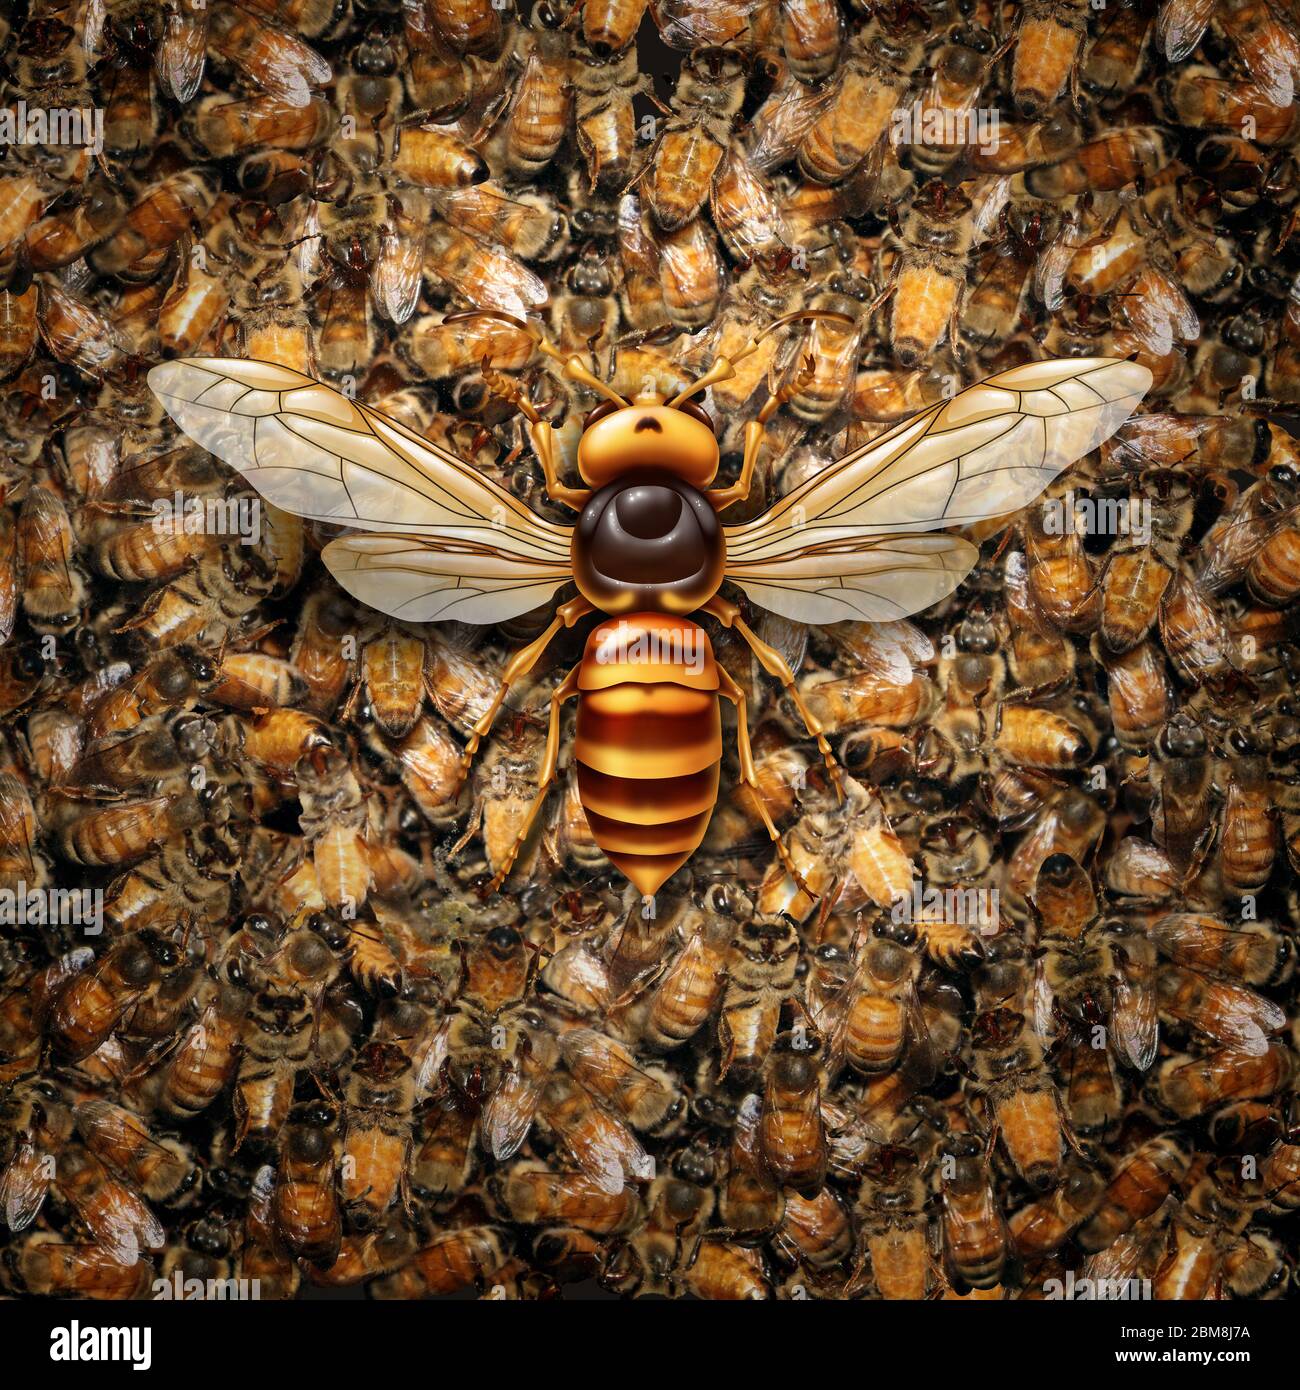 Giant Hornet Predator Attacking Bees as a Murder hornet or Asian giant insect that kills honeybees as an animal concept for an invasive species. Stock Photo